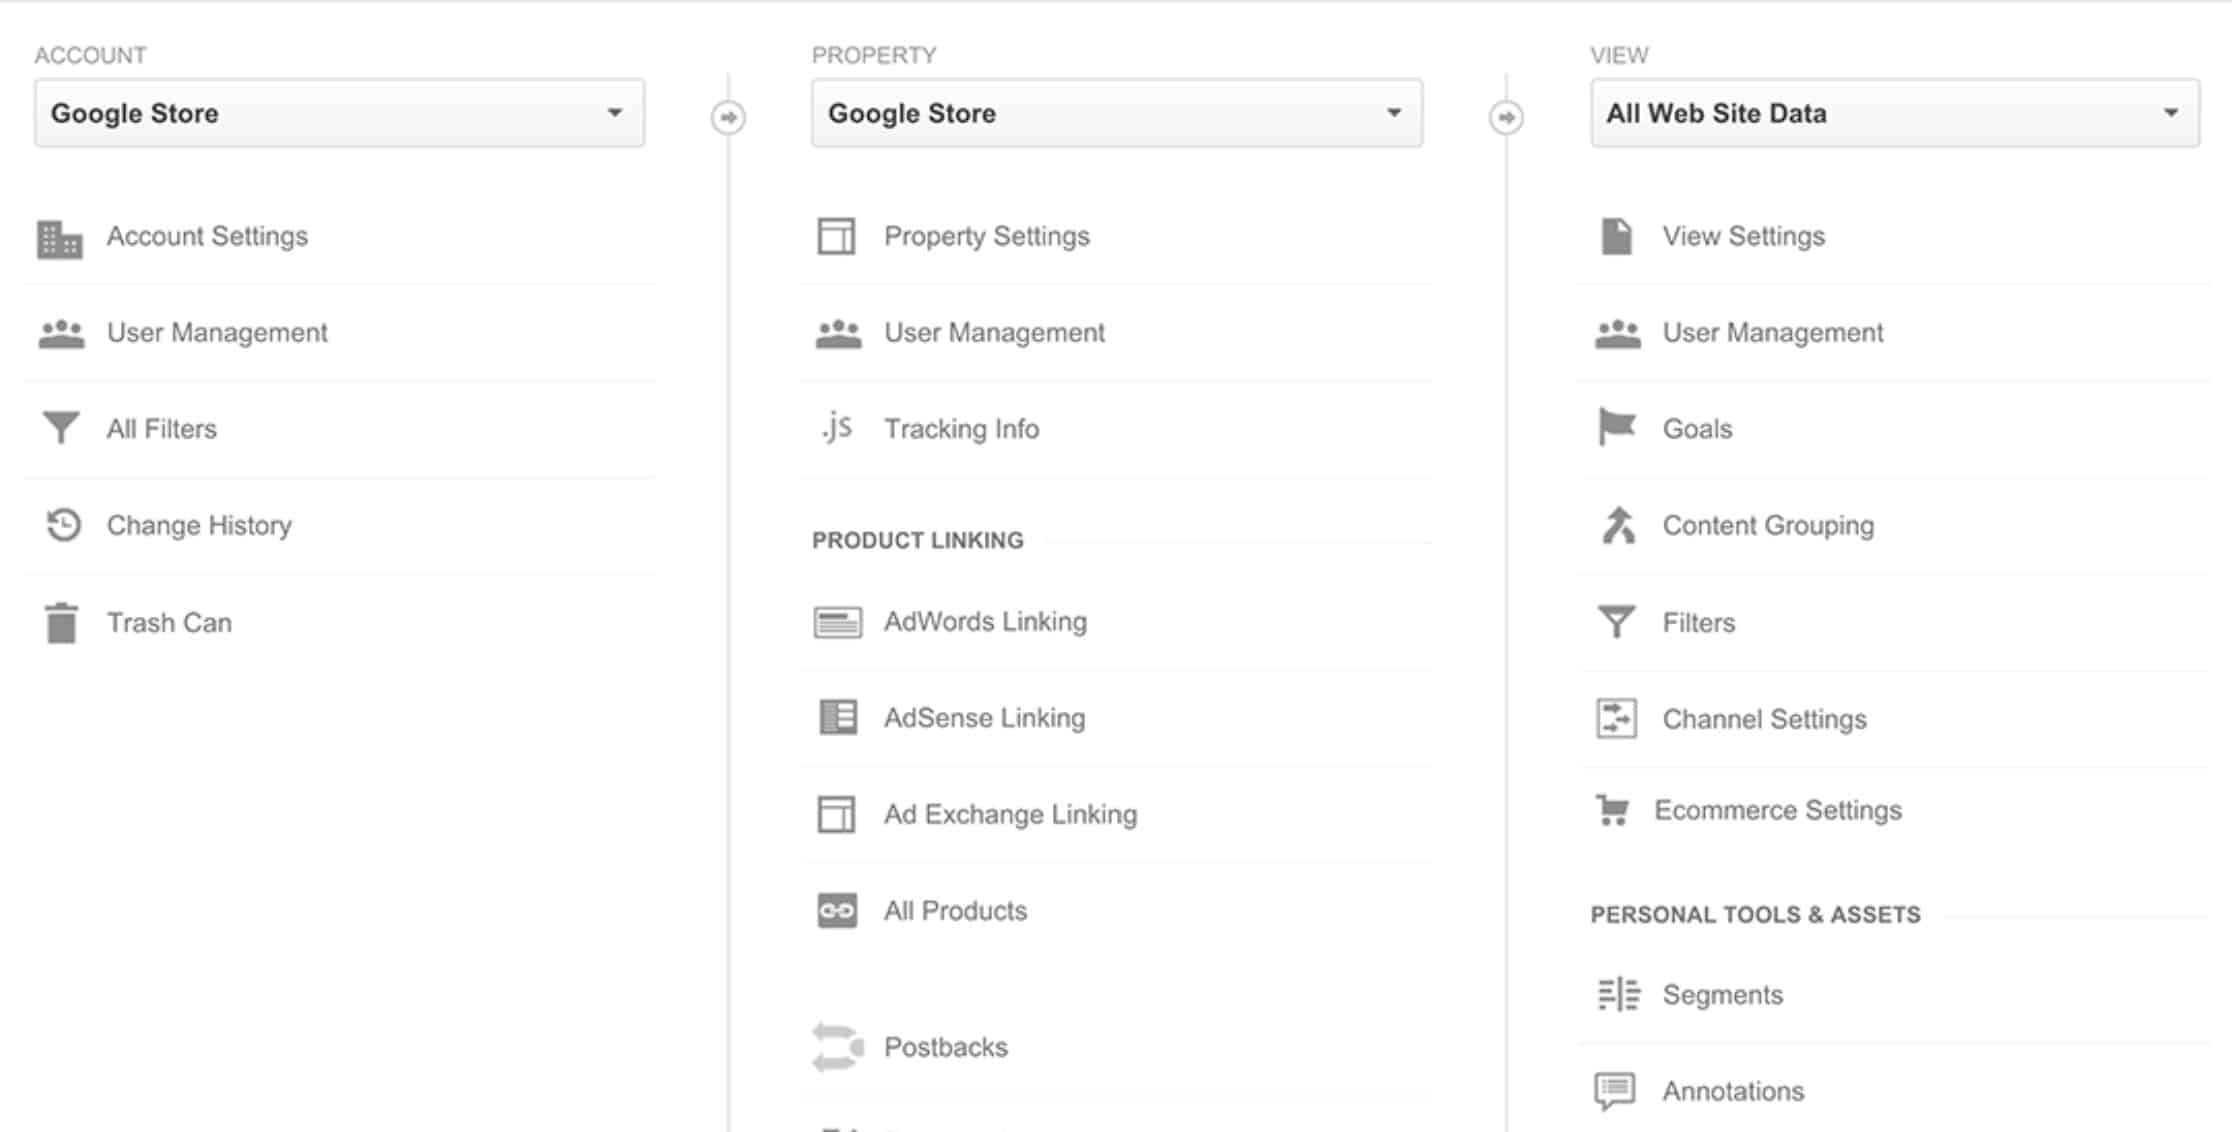 Getting Started with Google Analytics 